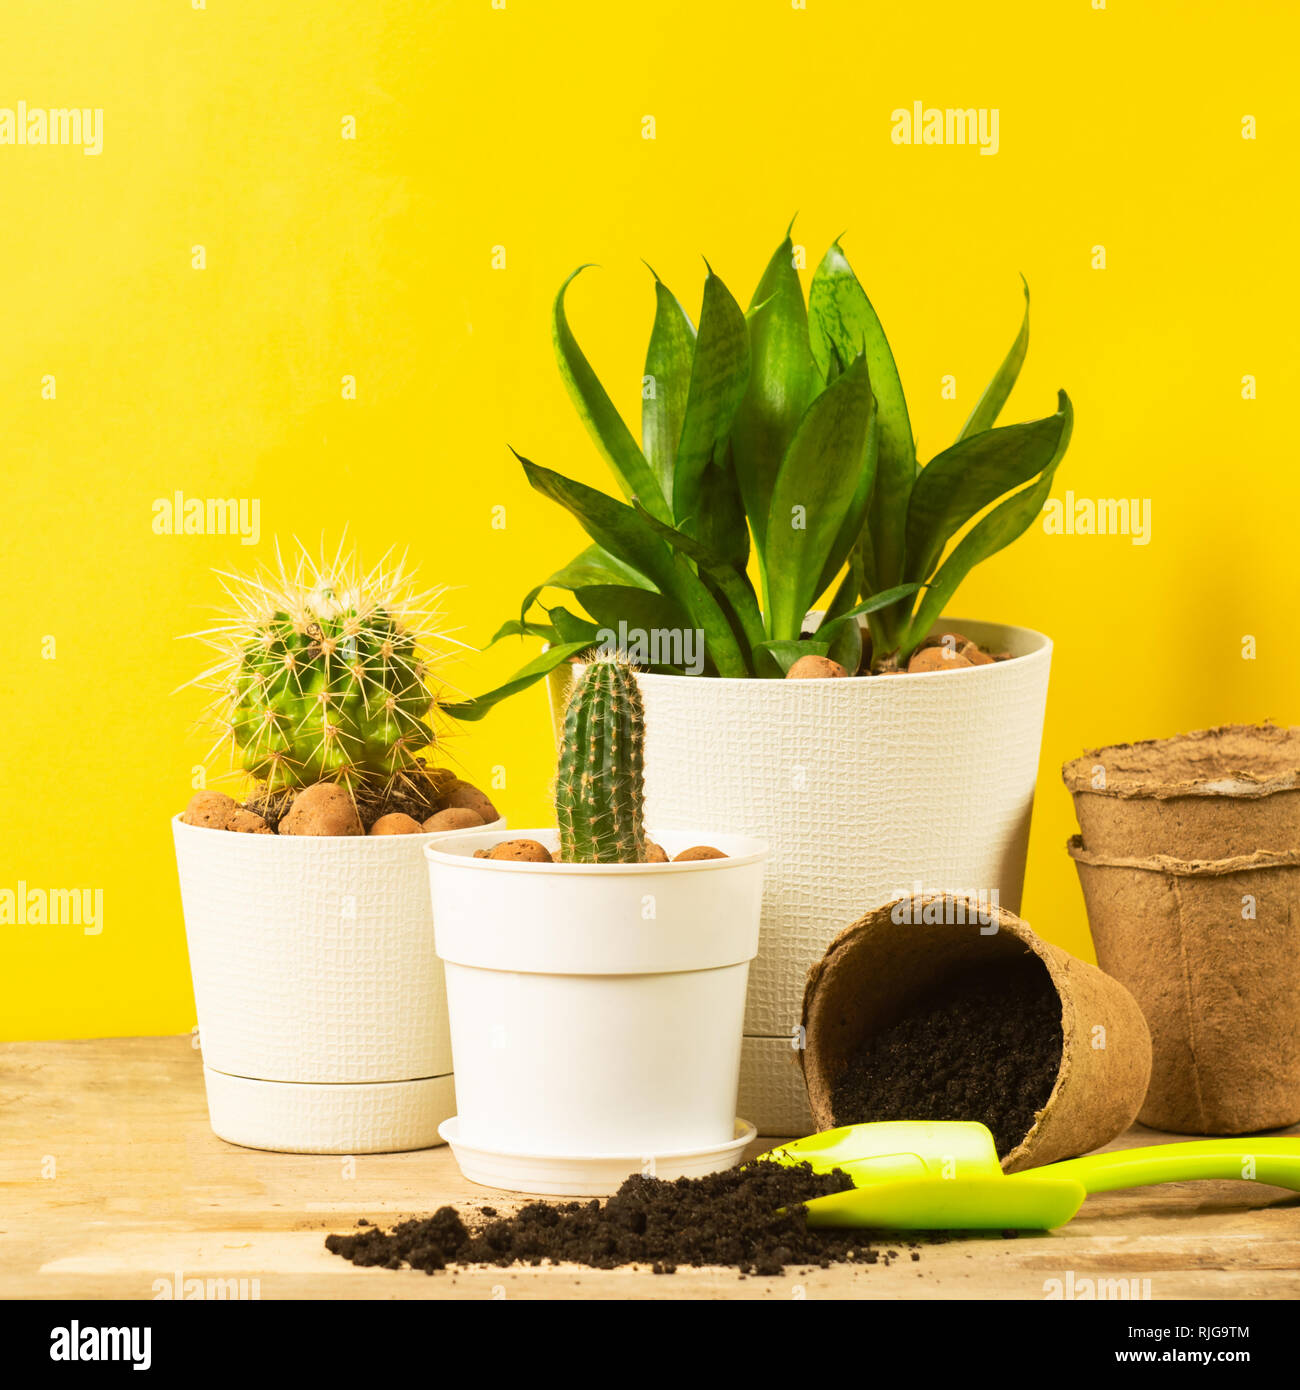 Home plant cacti in pots on a bright yellow background. Transplanting plants. The concept of spring. Stock Photo